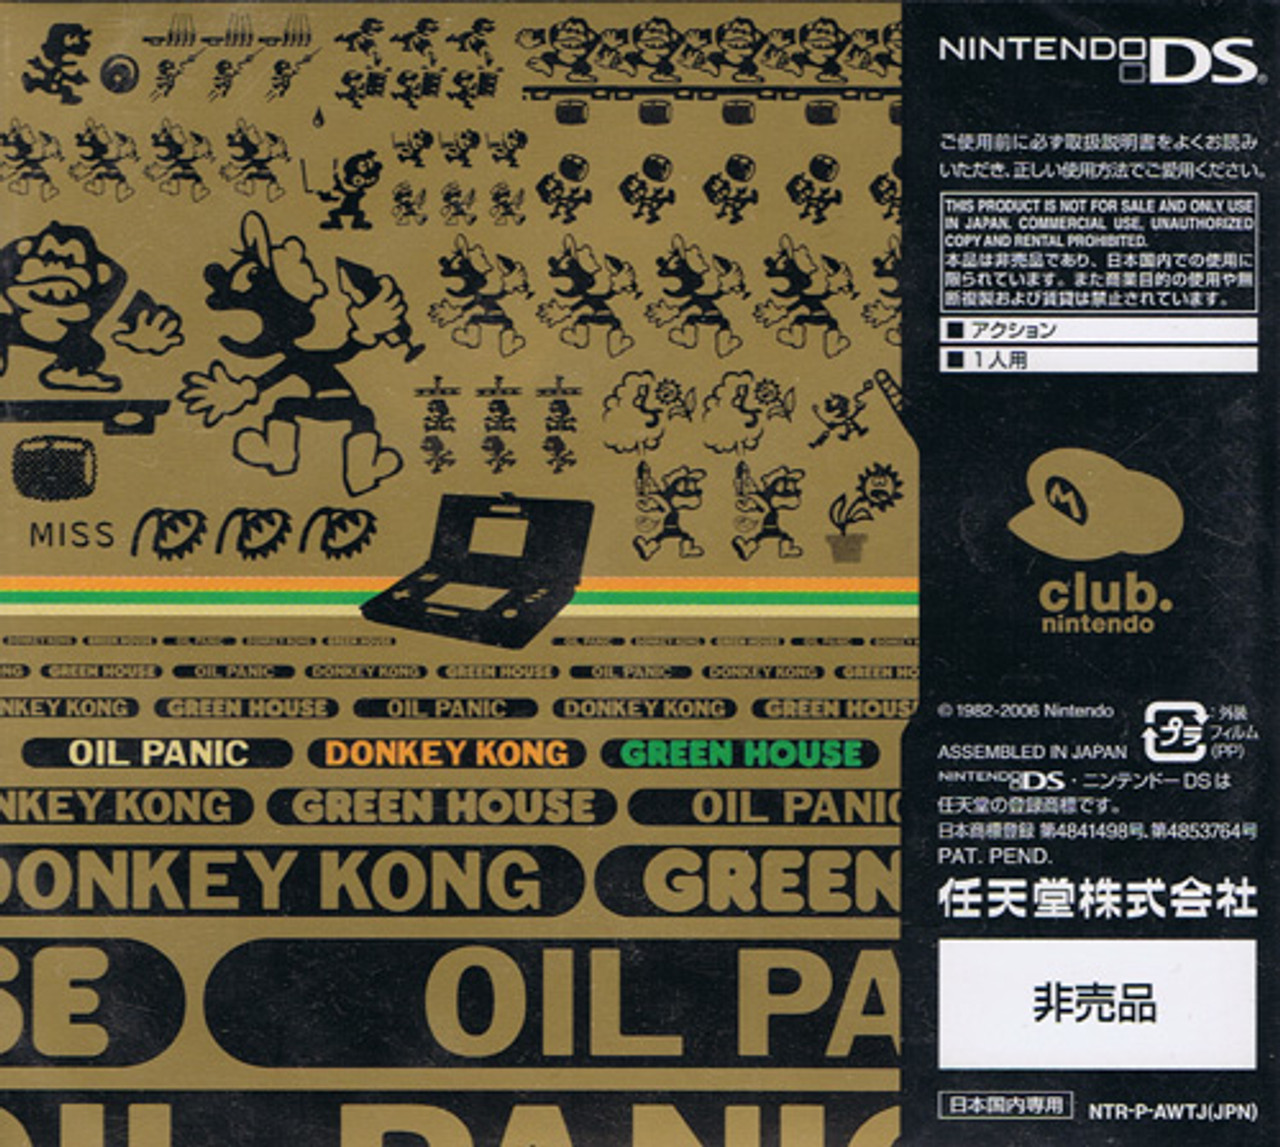 Game & Watch Collection 1 - Nintendo DS (Japan) available at 